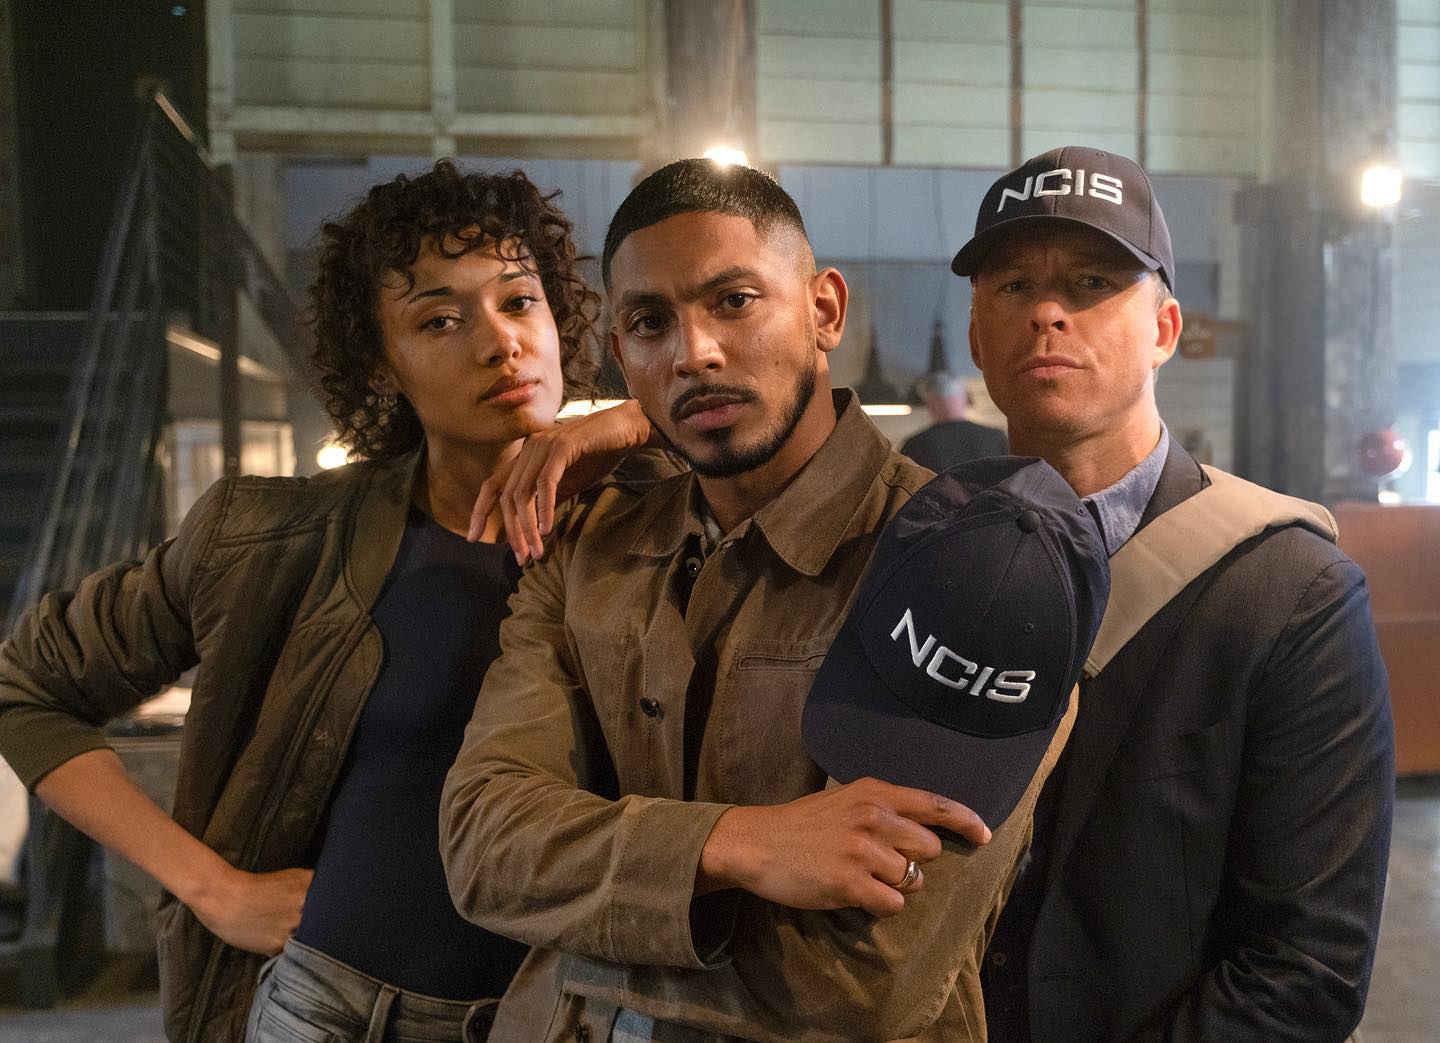 The Jordan character was recast due to scheduling conflicts after Sean landed a lead role in the fifth installment of the NCIS franchise, NCIS: Sydney